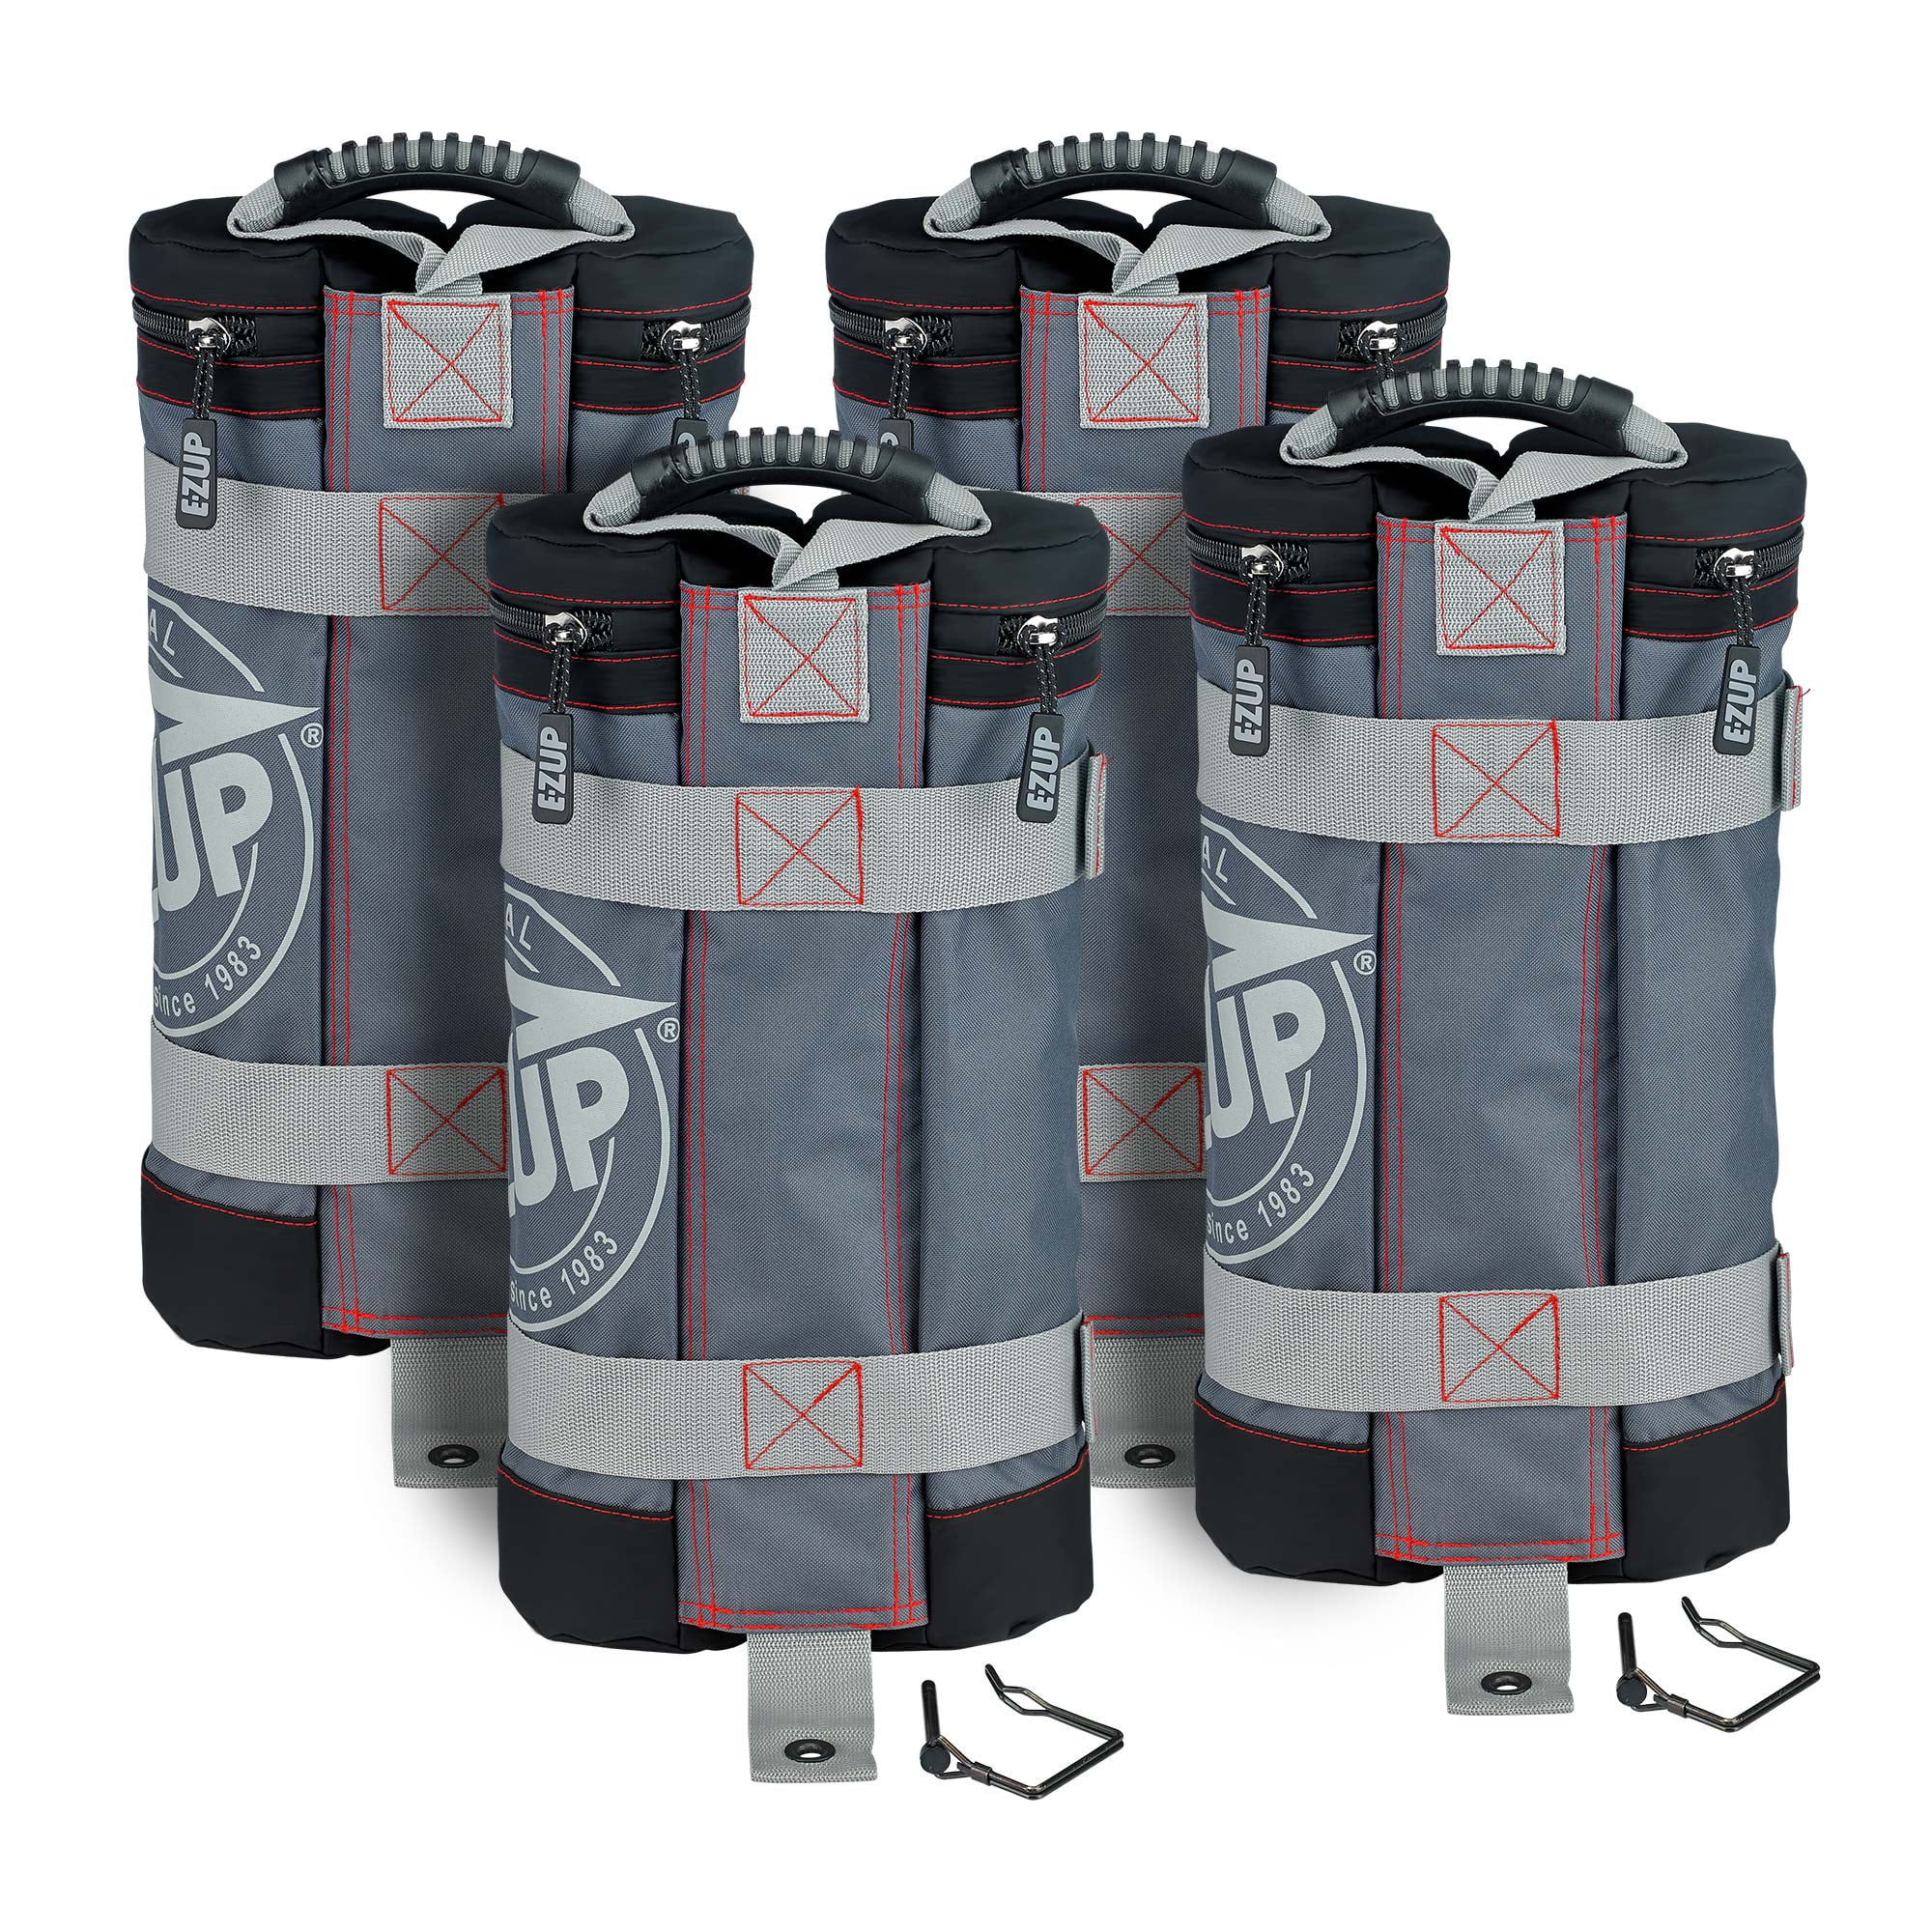 Lead Weight Bags